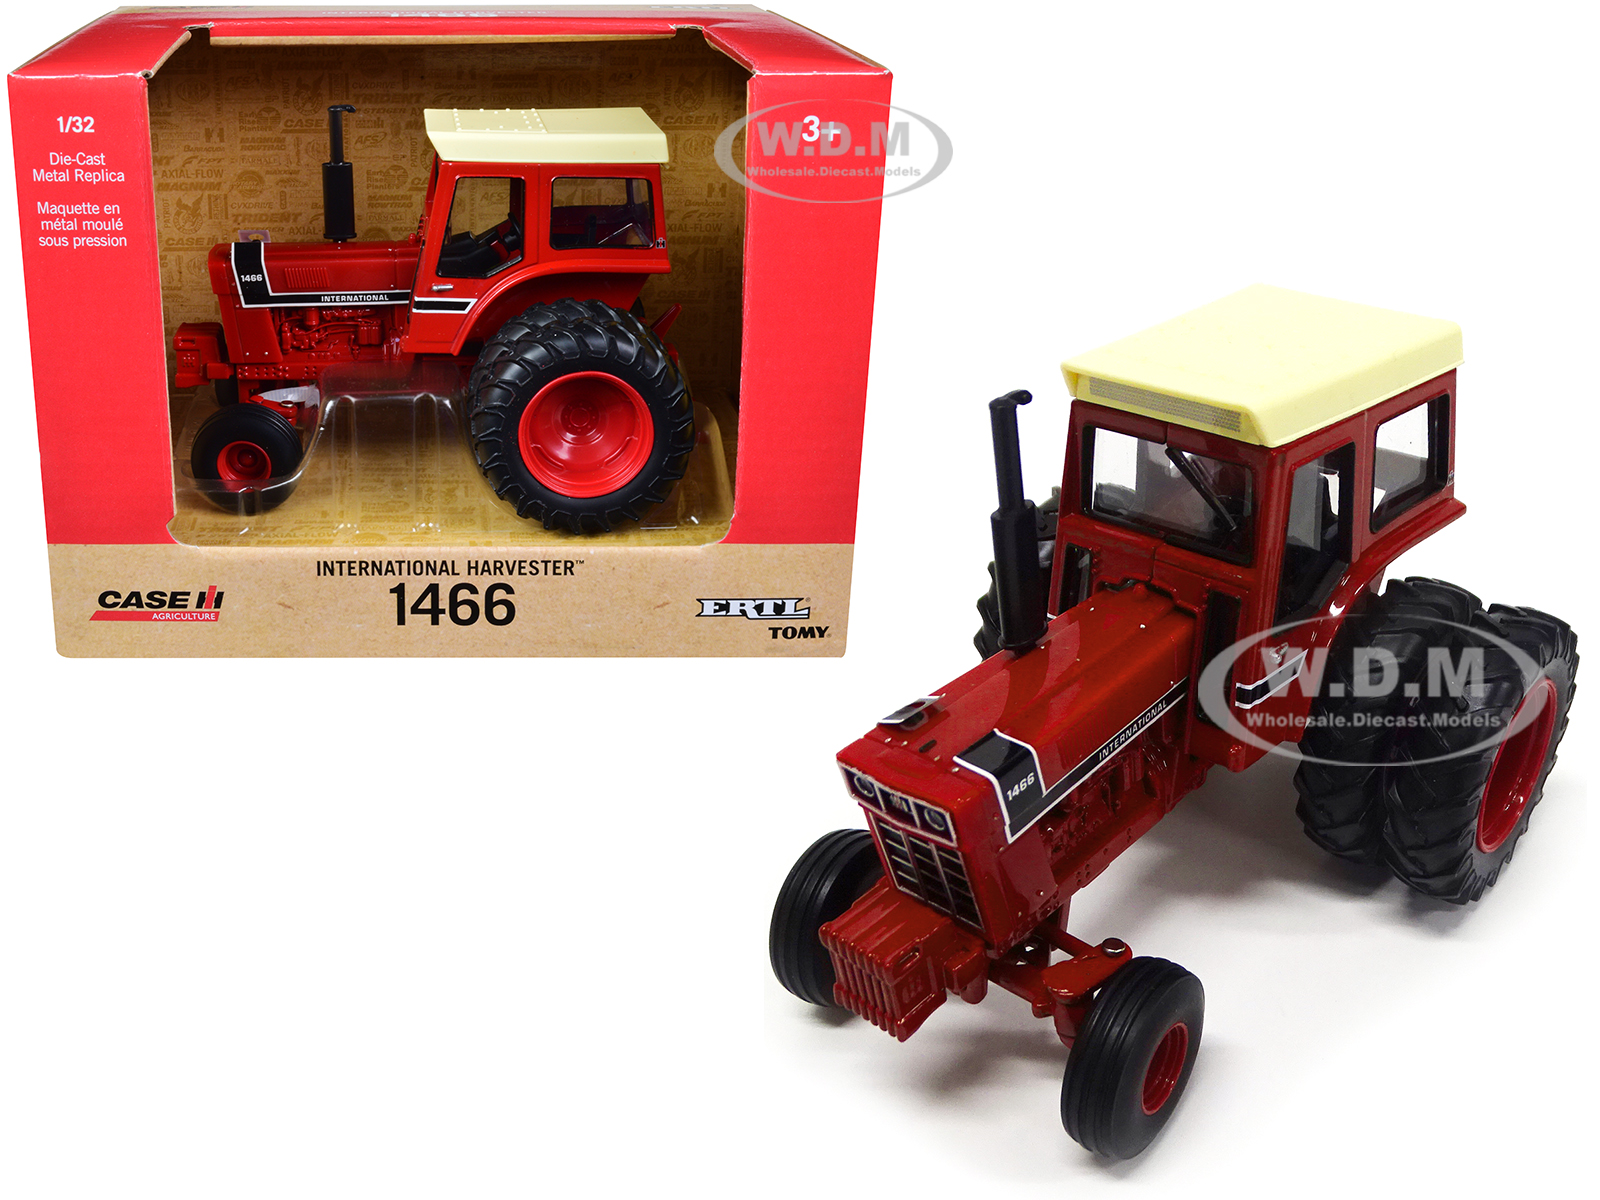 International Harvester 1466 Tractor Red Case IH Agriculture Series 1/32 Diecast Model by ERTL TOMY